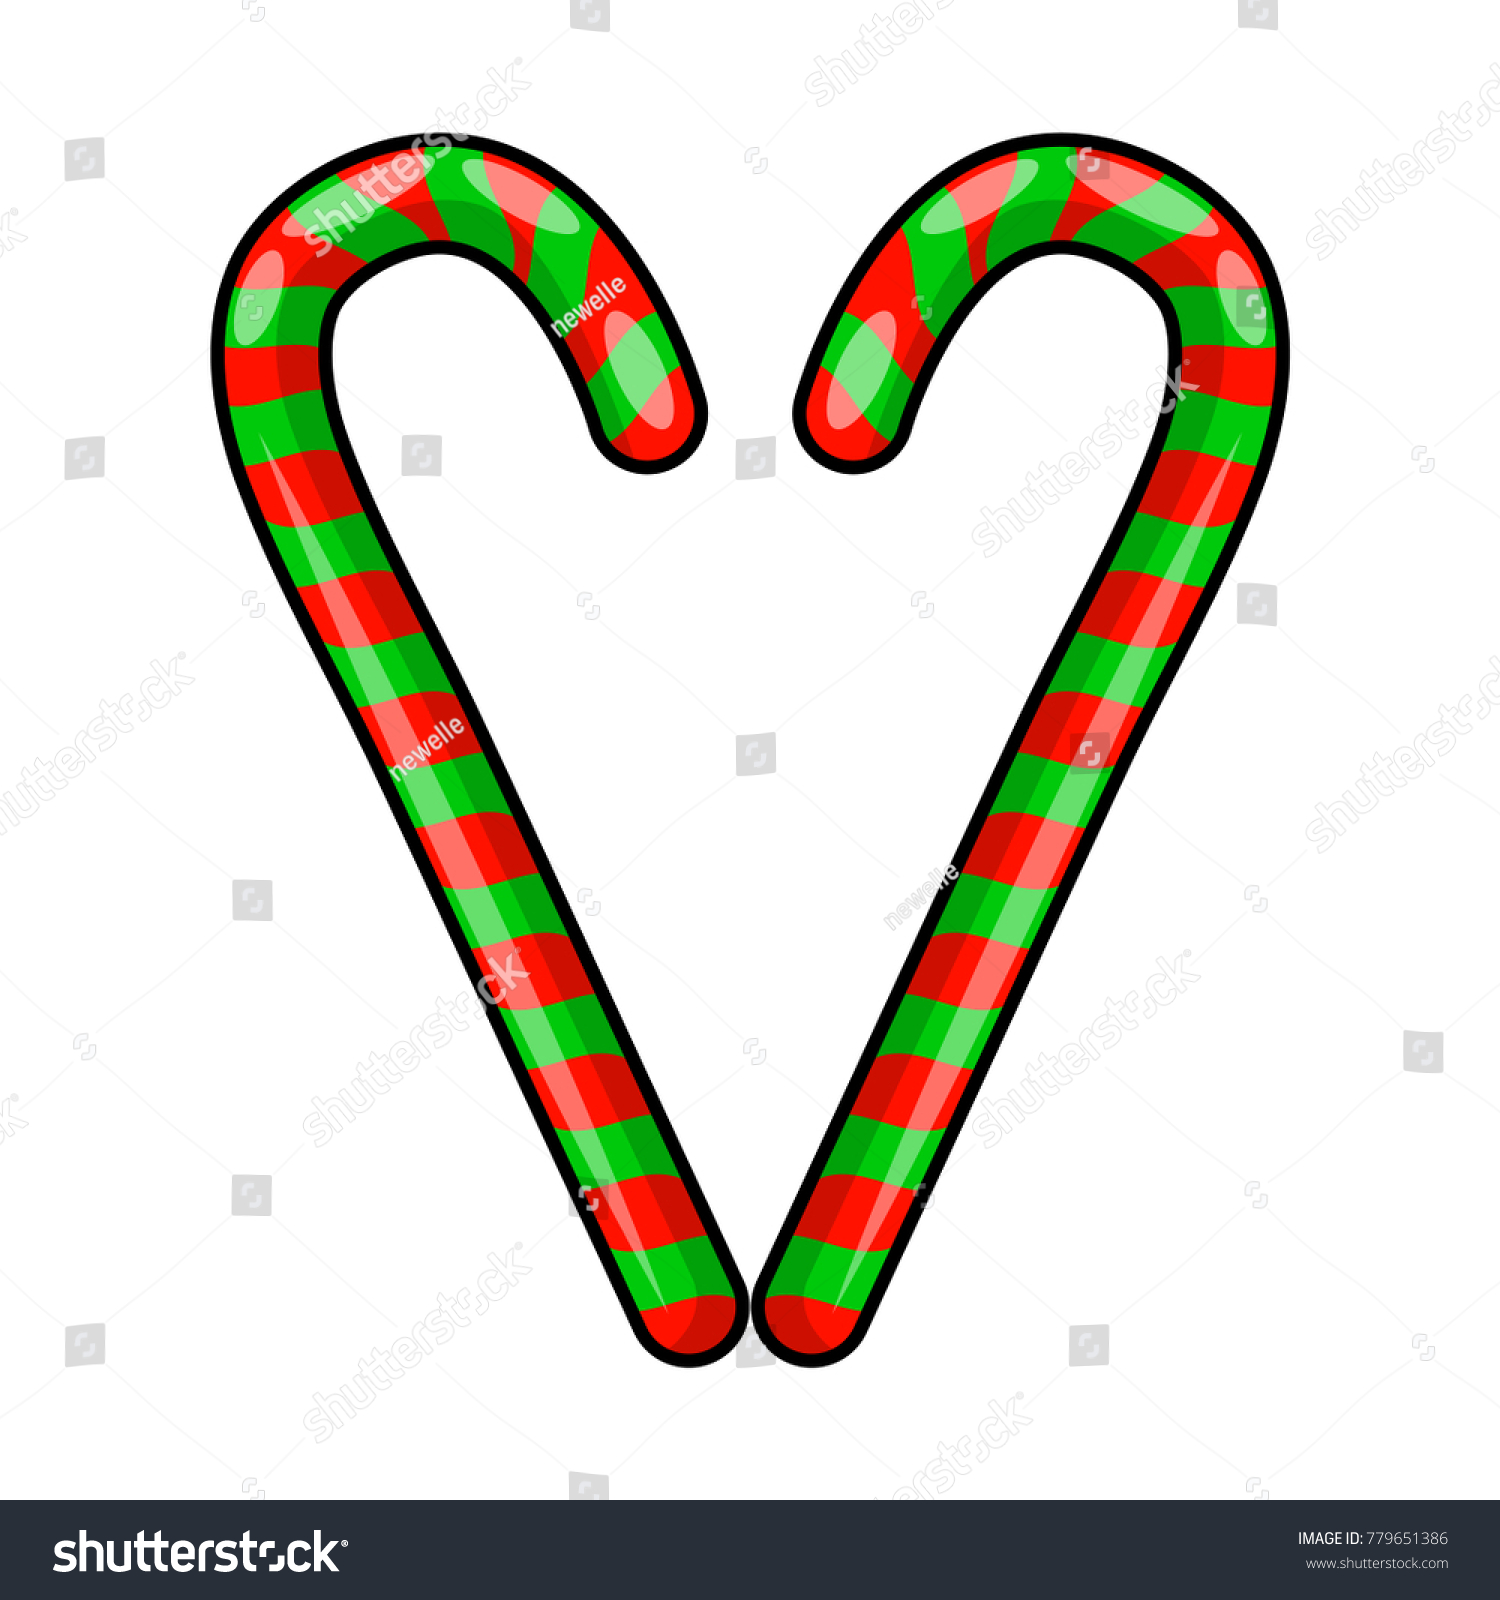 Candy cane heart for christmas design isolated on white background
 #779651386